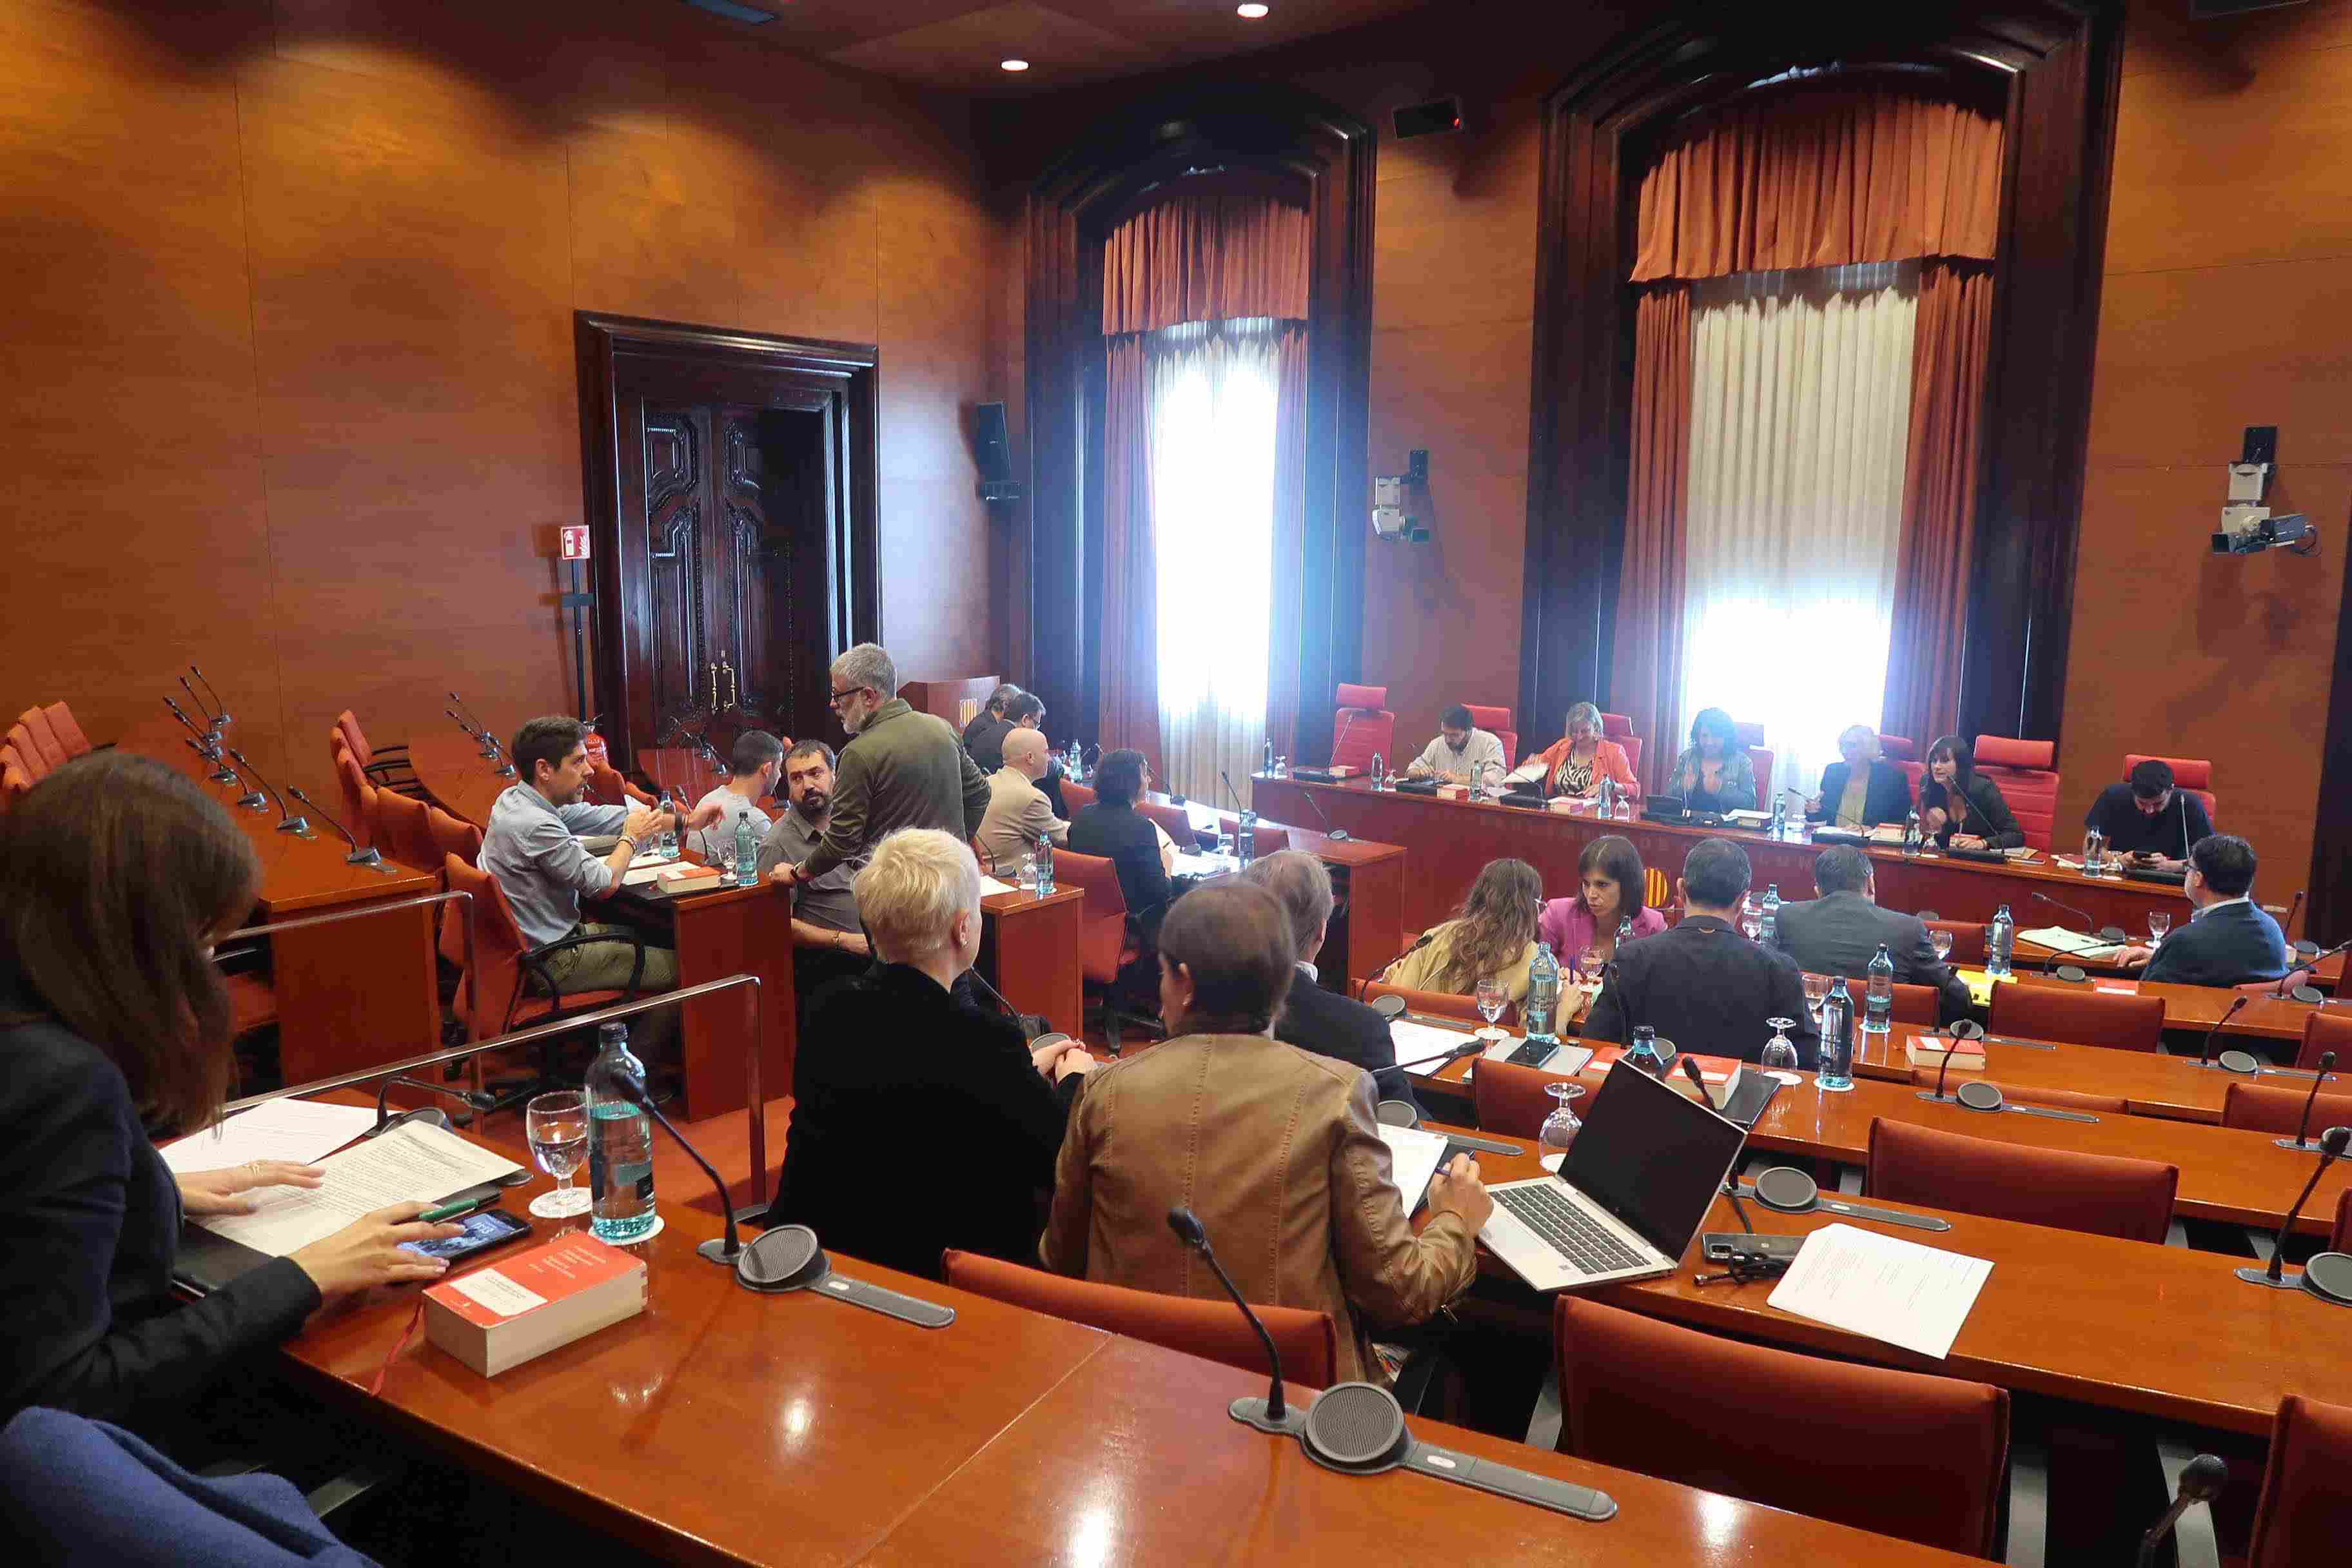 With votes of PSC, Junts, Cs and PP, Catalan Parliament passes motion urging a ceasefire in Gaza